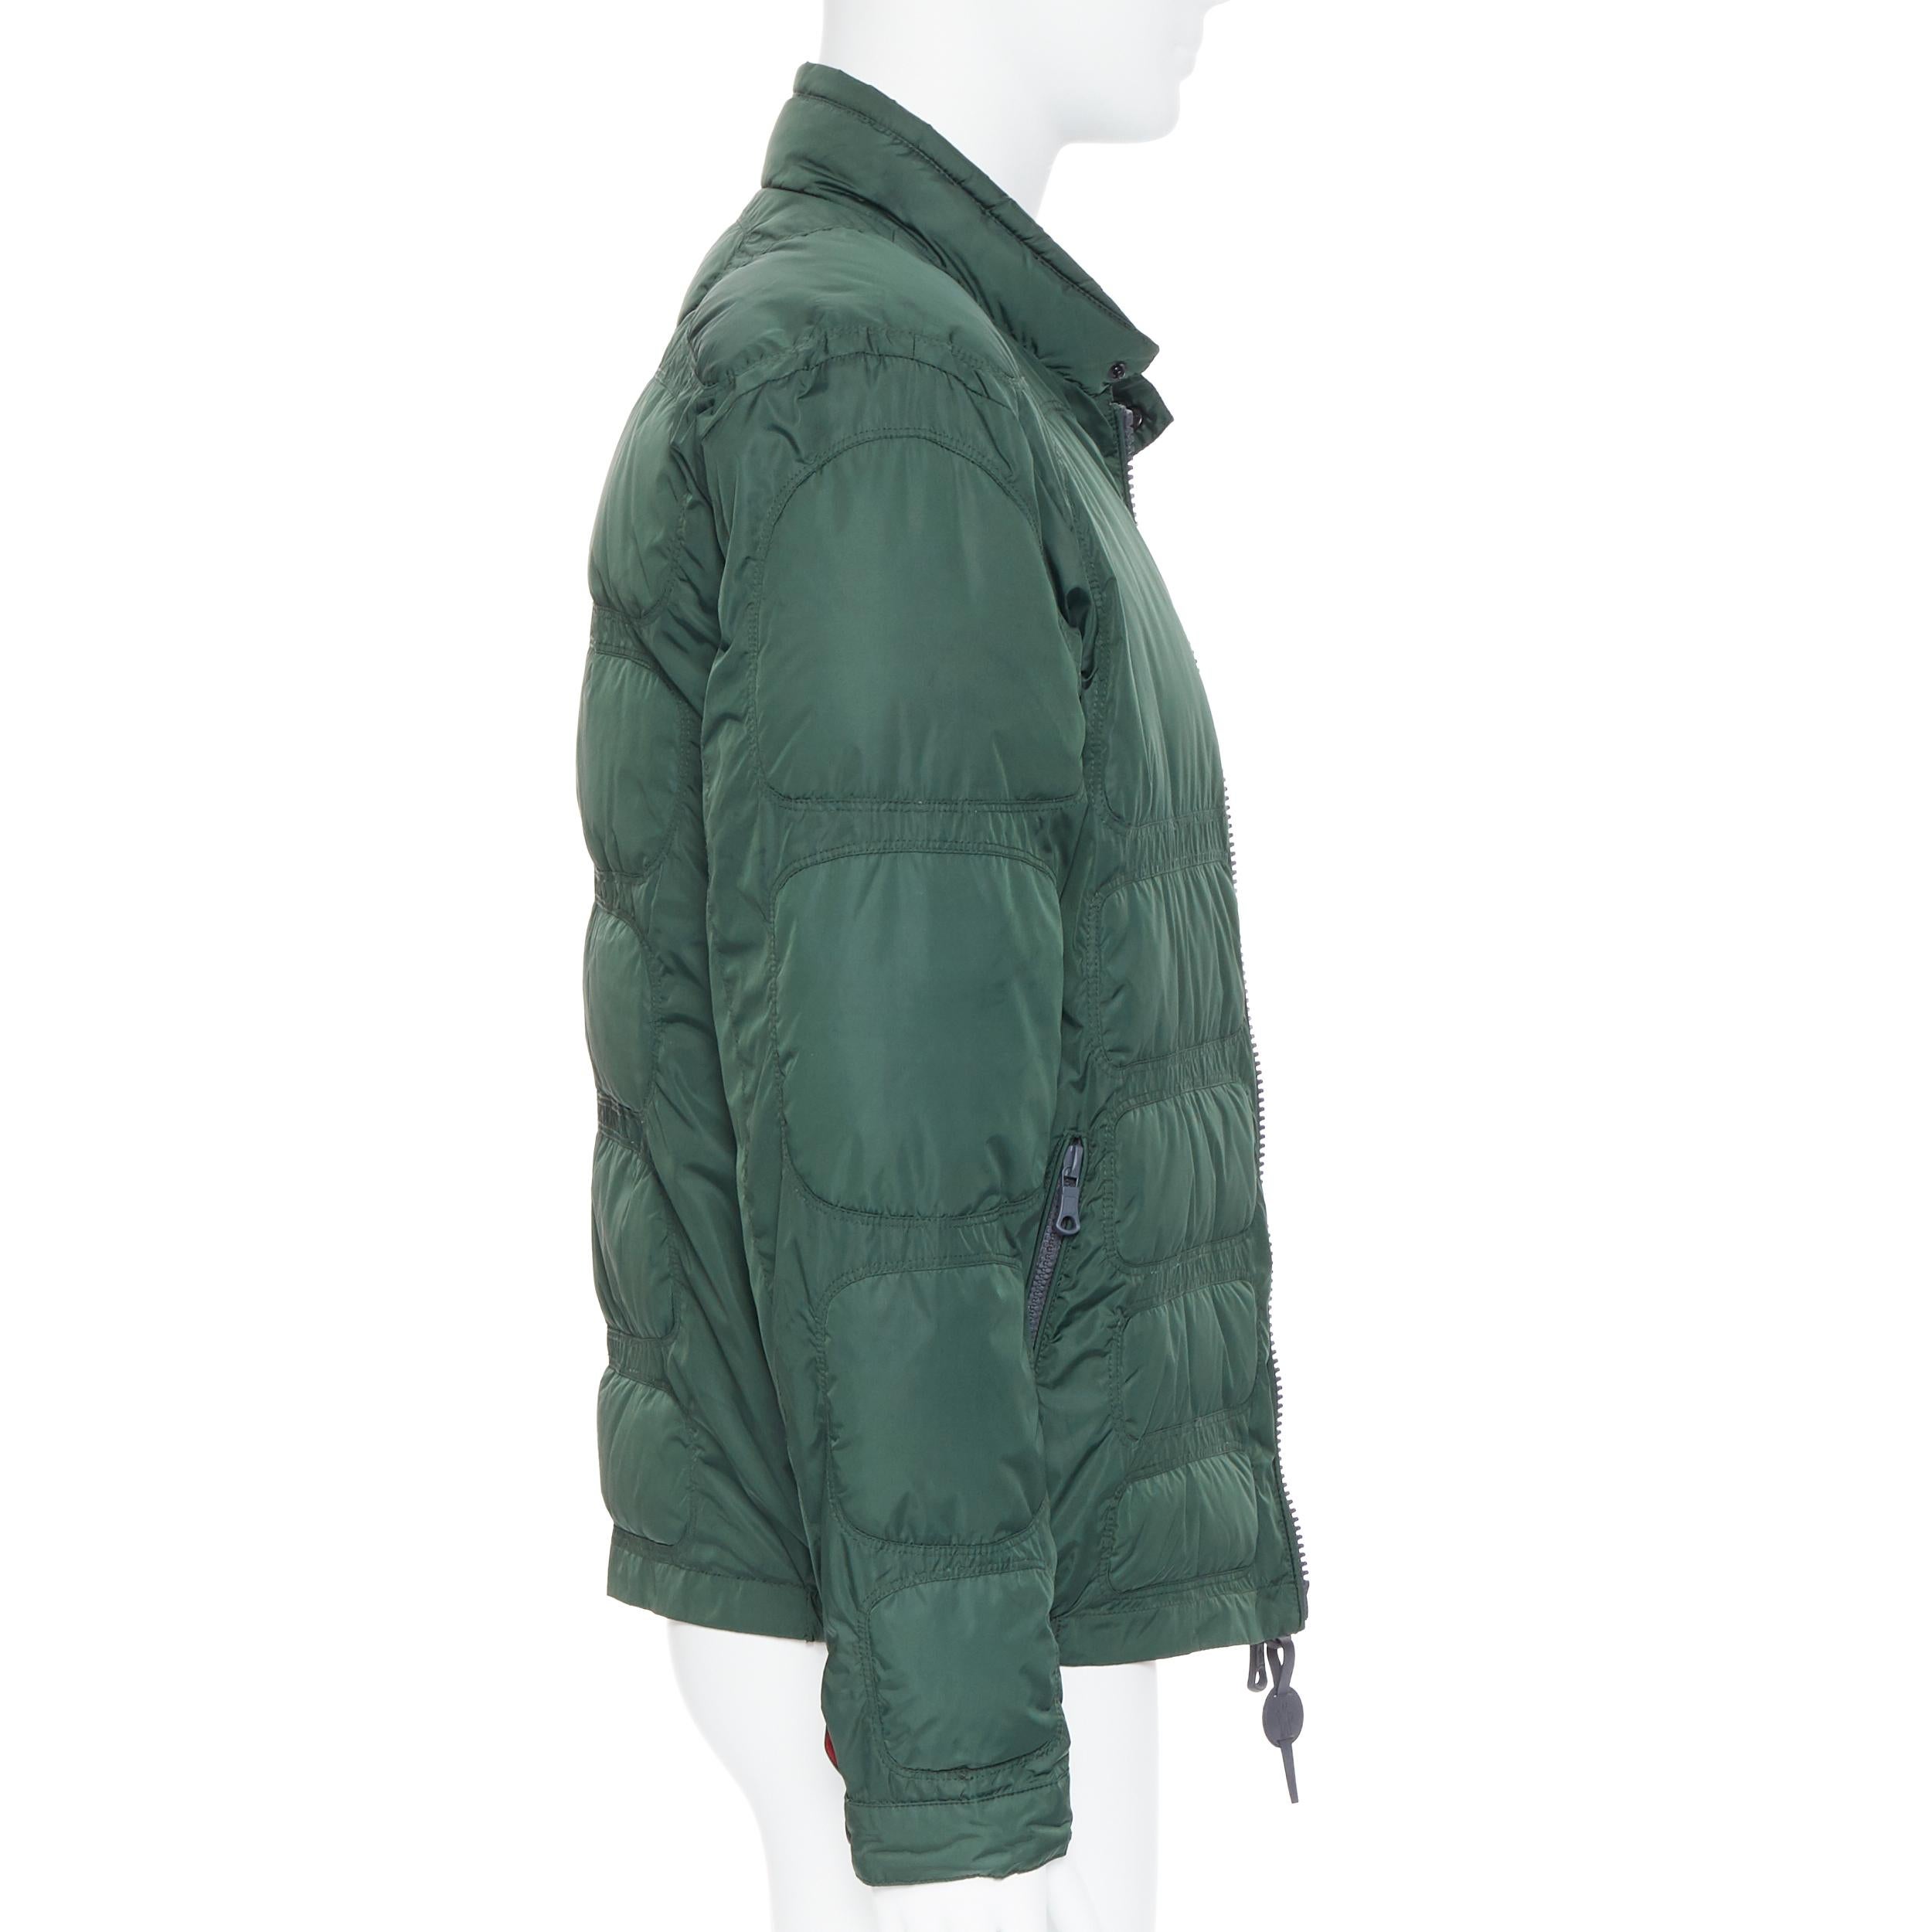 Black MONCLER Cheriton Giubbotto green down feather padded puffer winter jacket US3 L